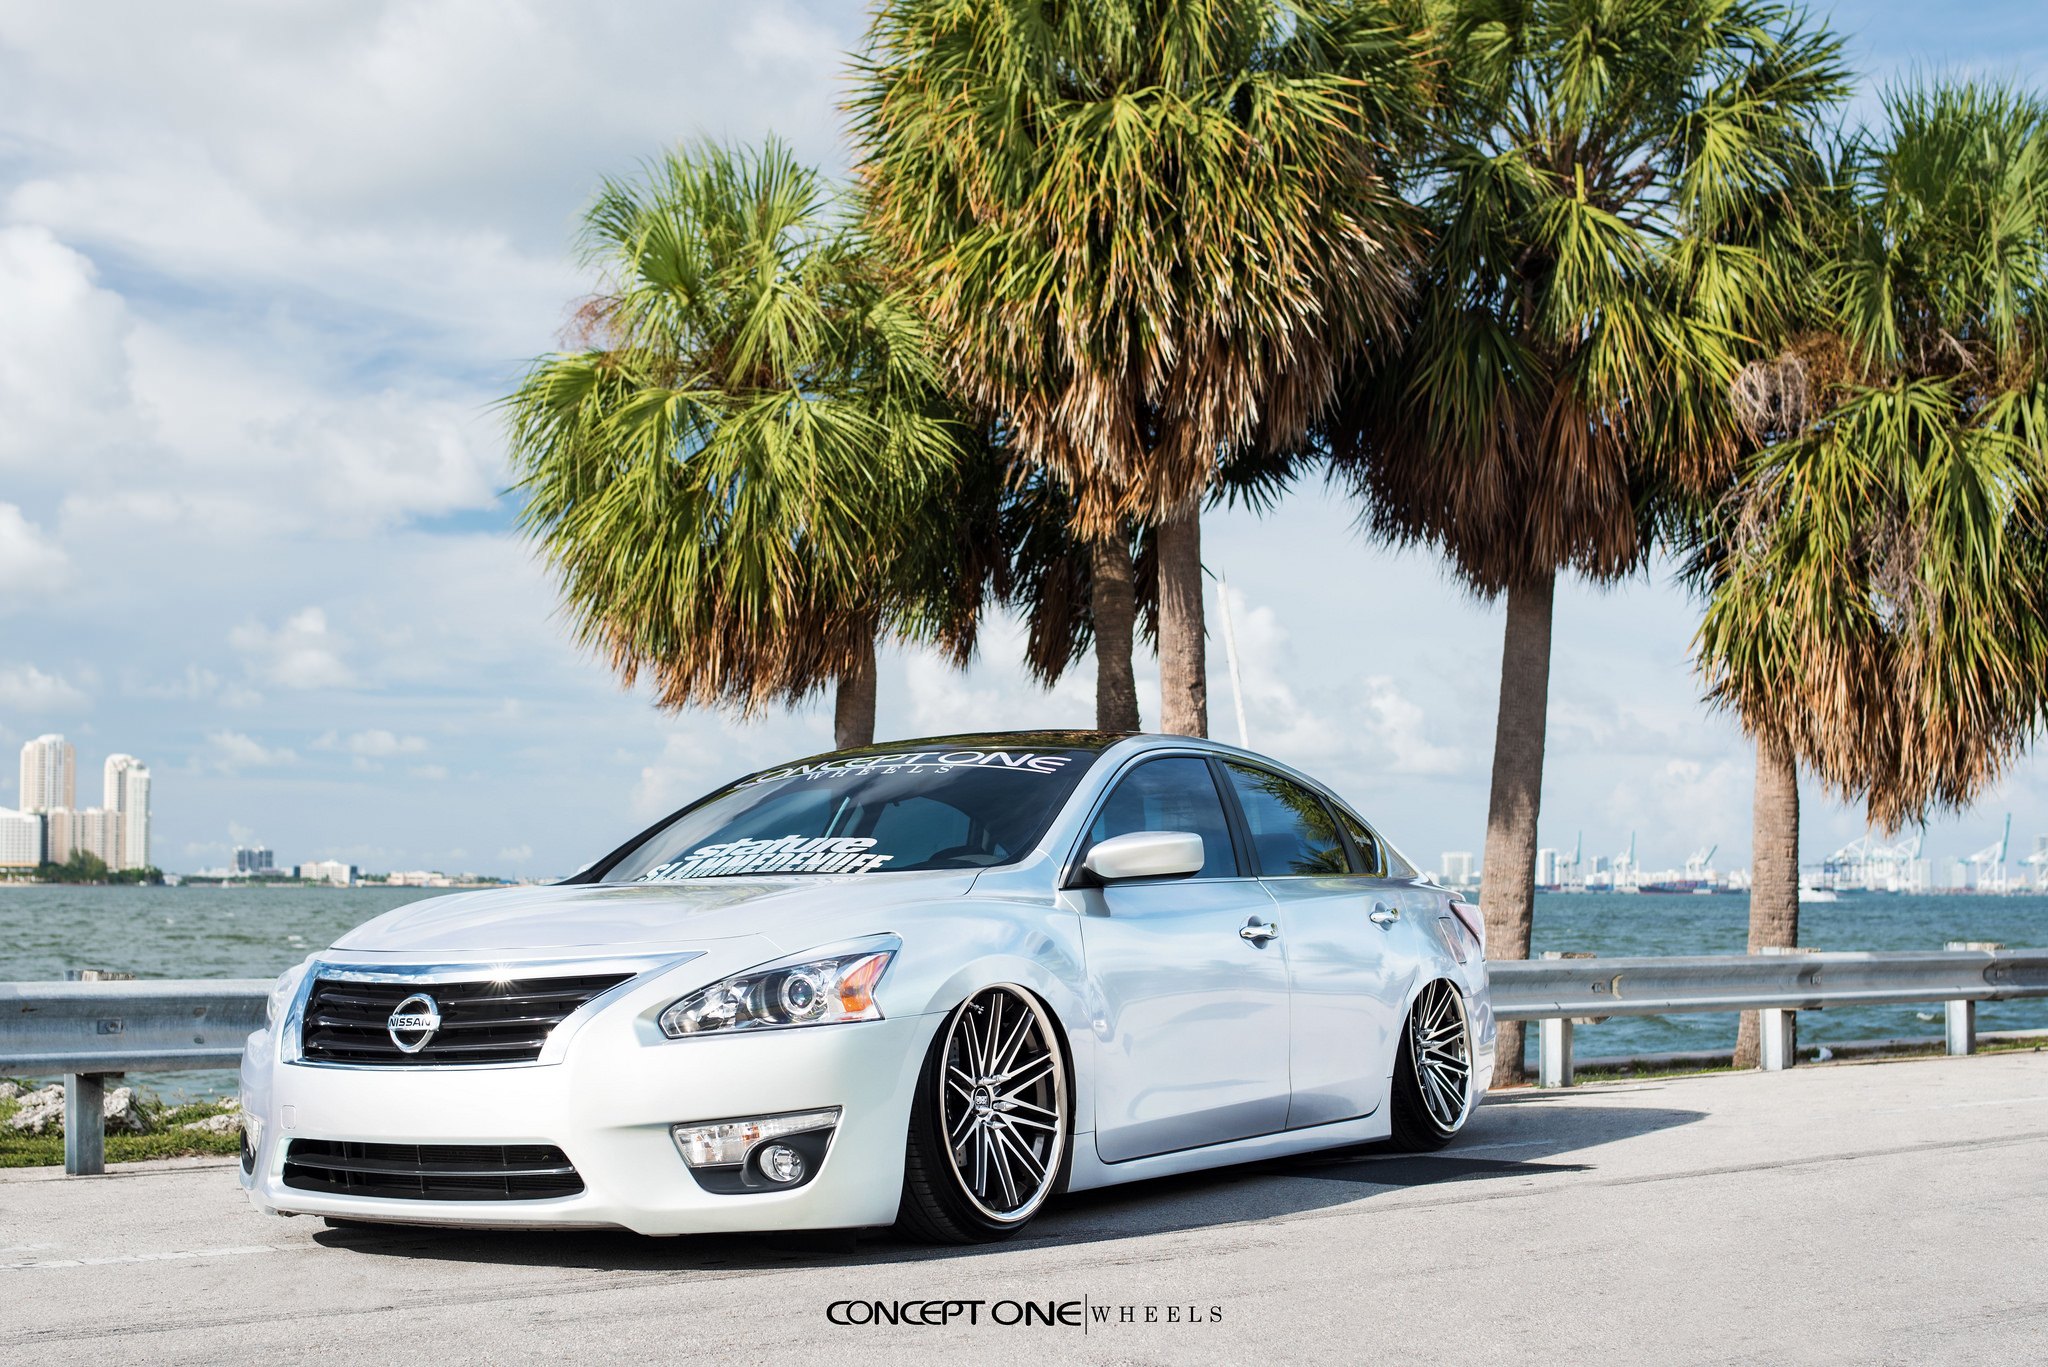 Front Bumper with Fog Lights on White Nissan Altima - Photo by Concept One